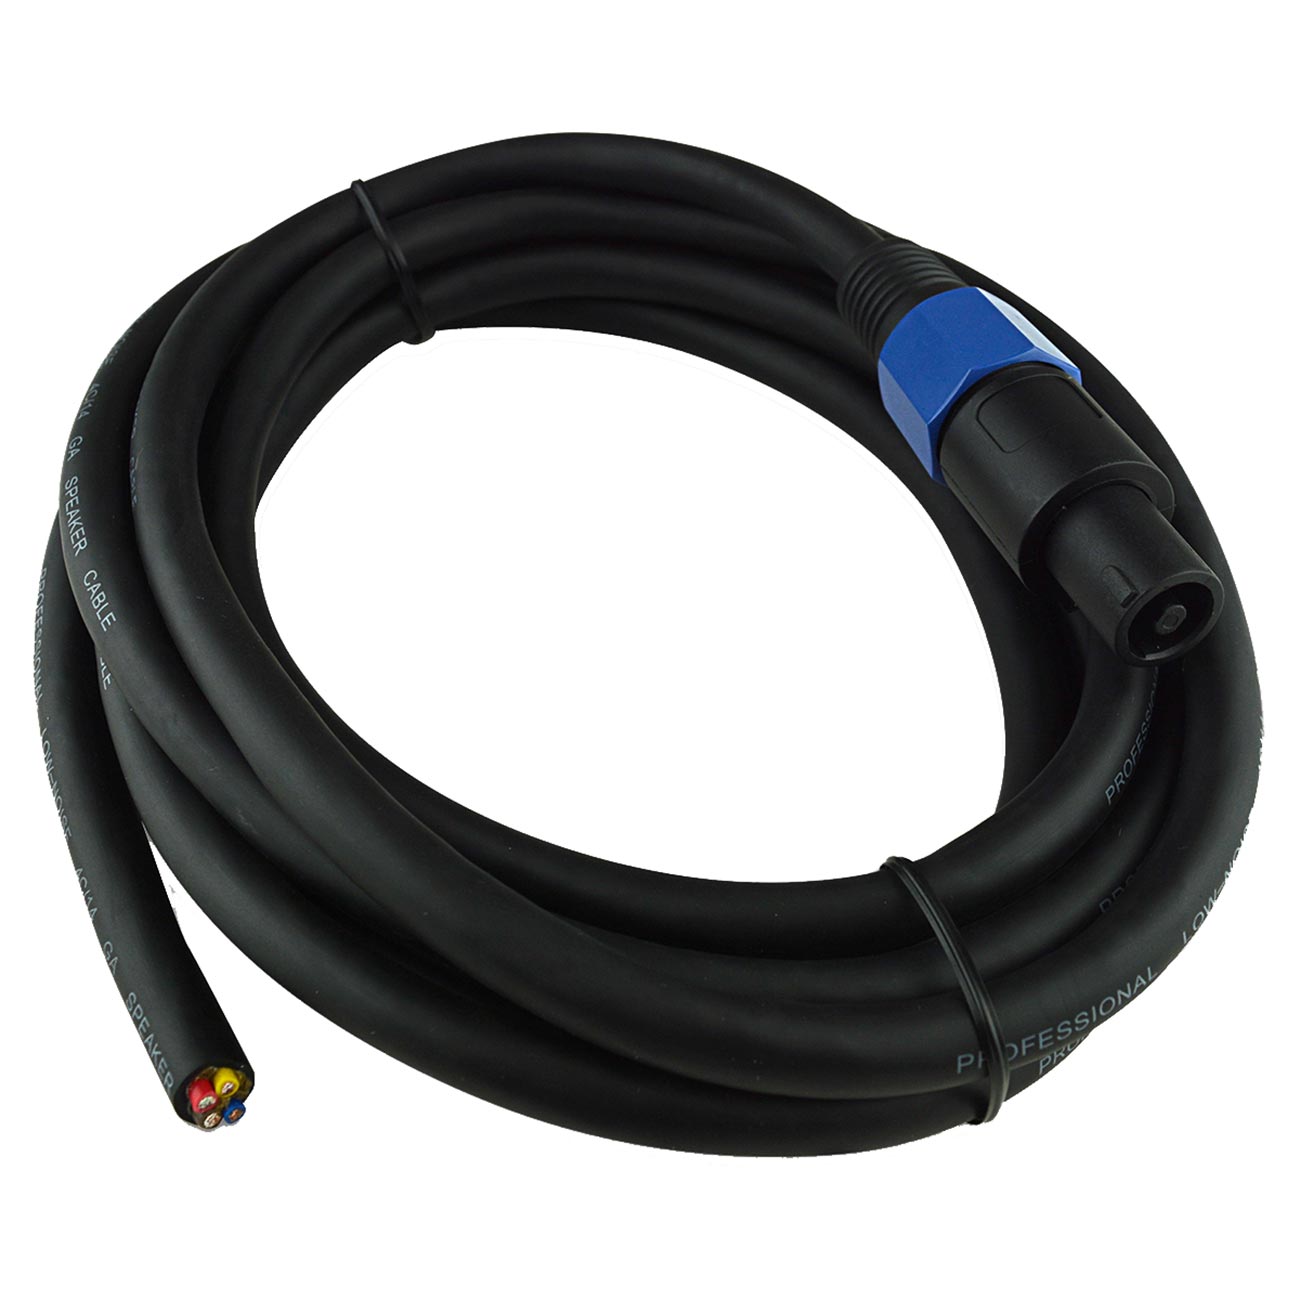 Pipeman's Installation Solution 12ft 4-Wire Speak-On Cable